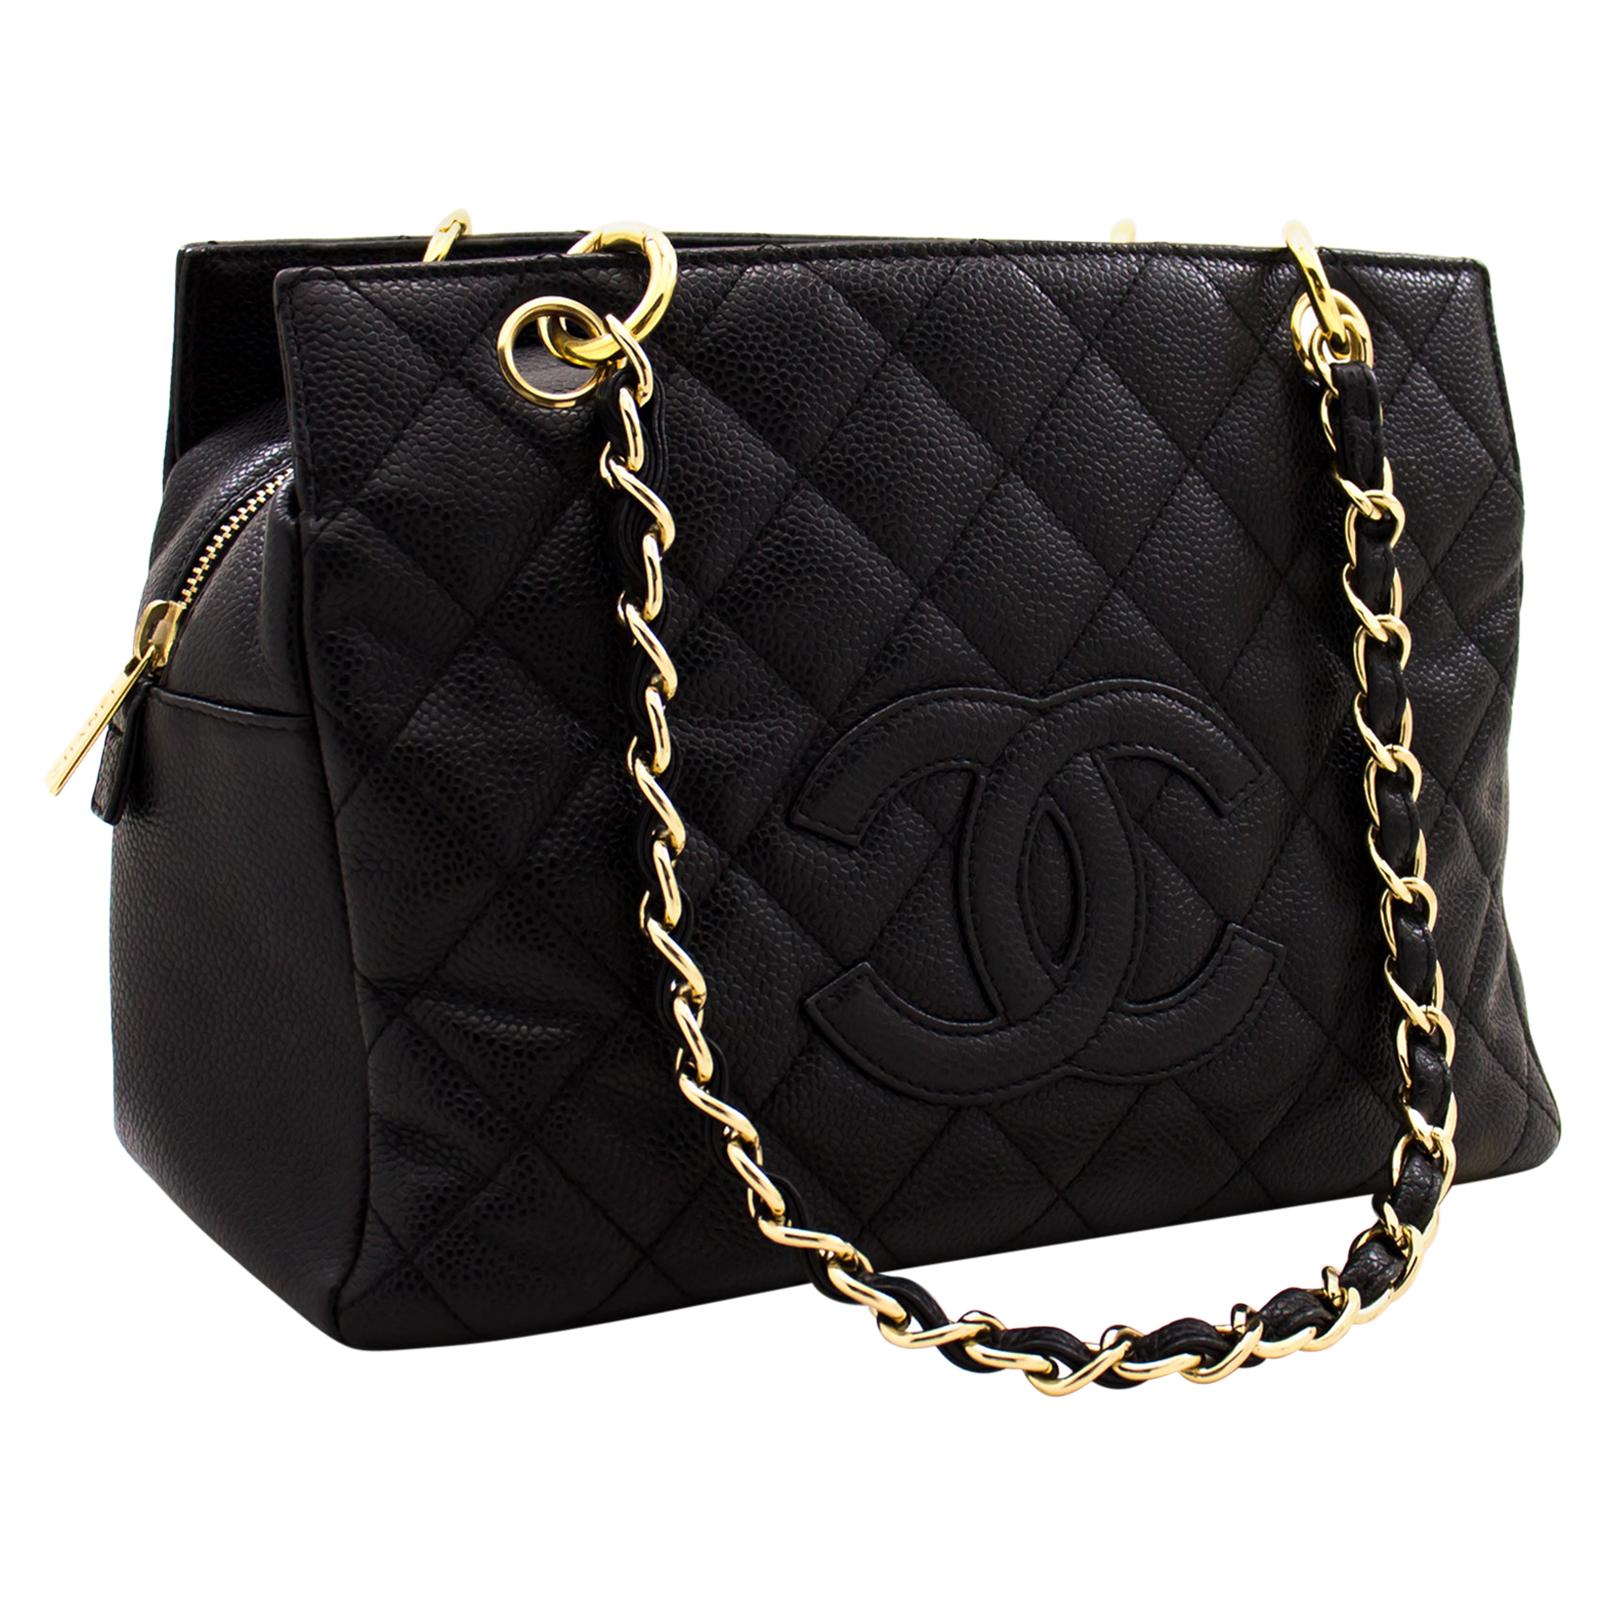 CHANEL Caviar Chain Shoulder Shopping Tote Bag Black Quilted Purse For ...